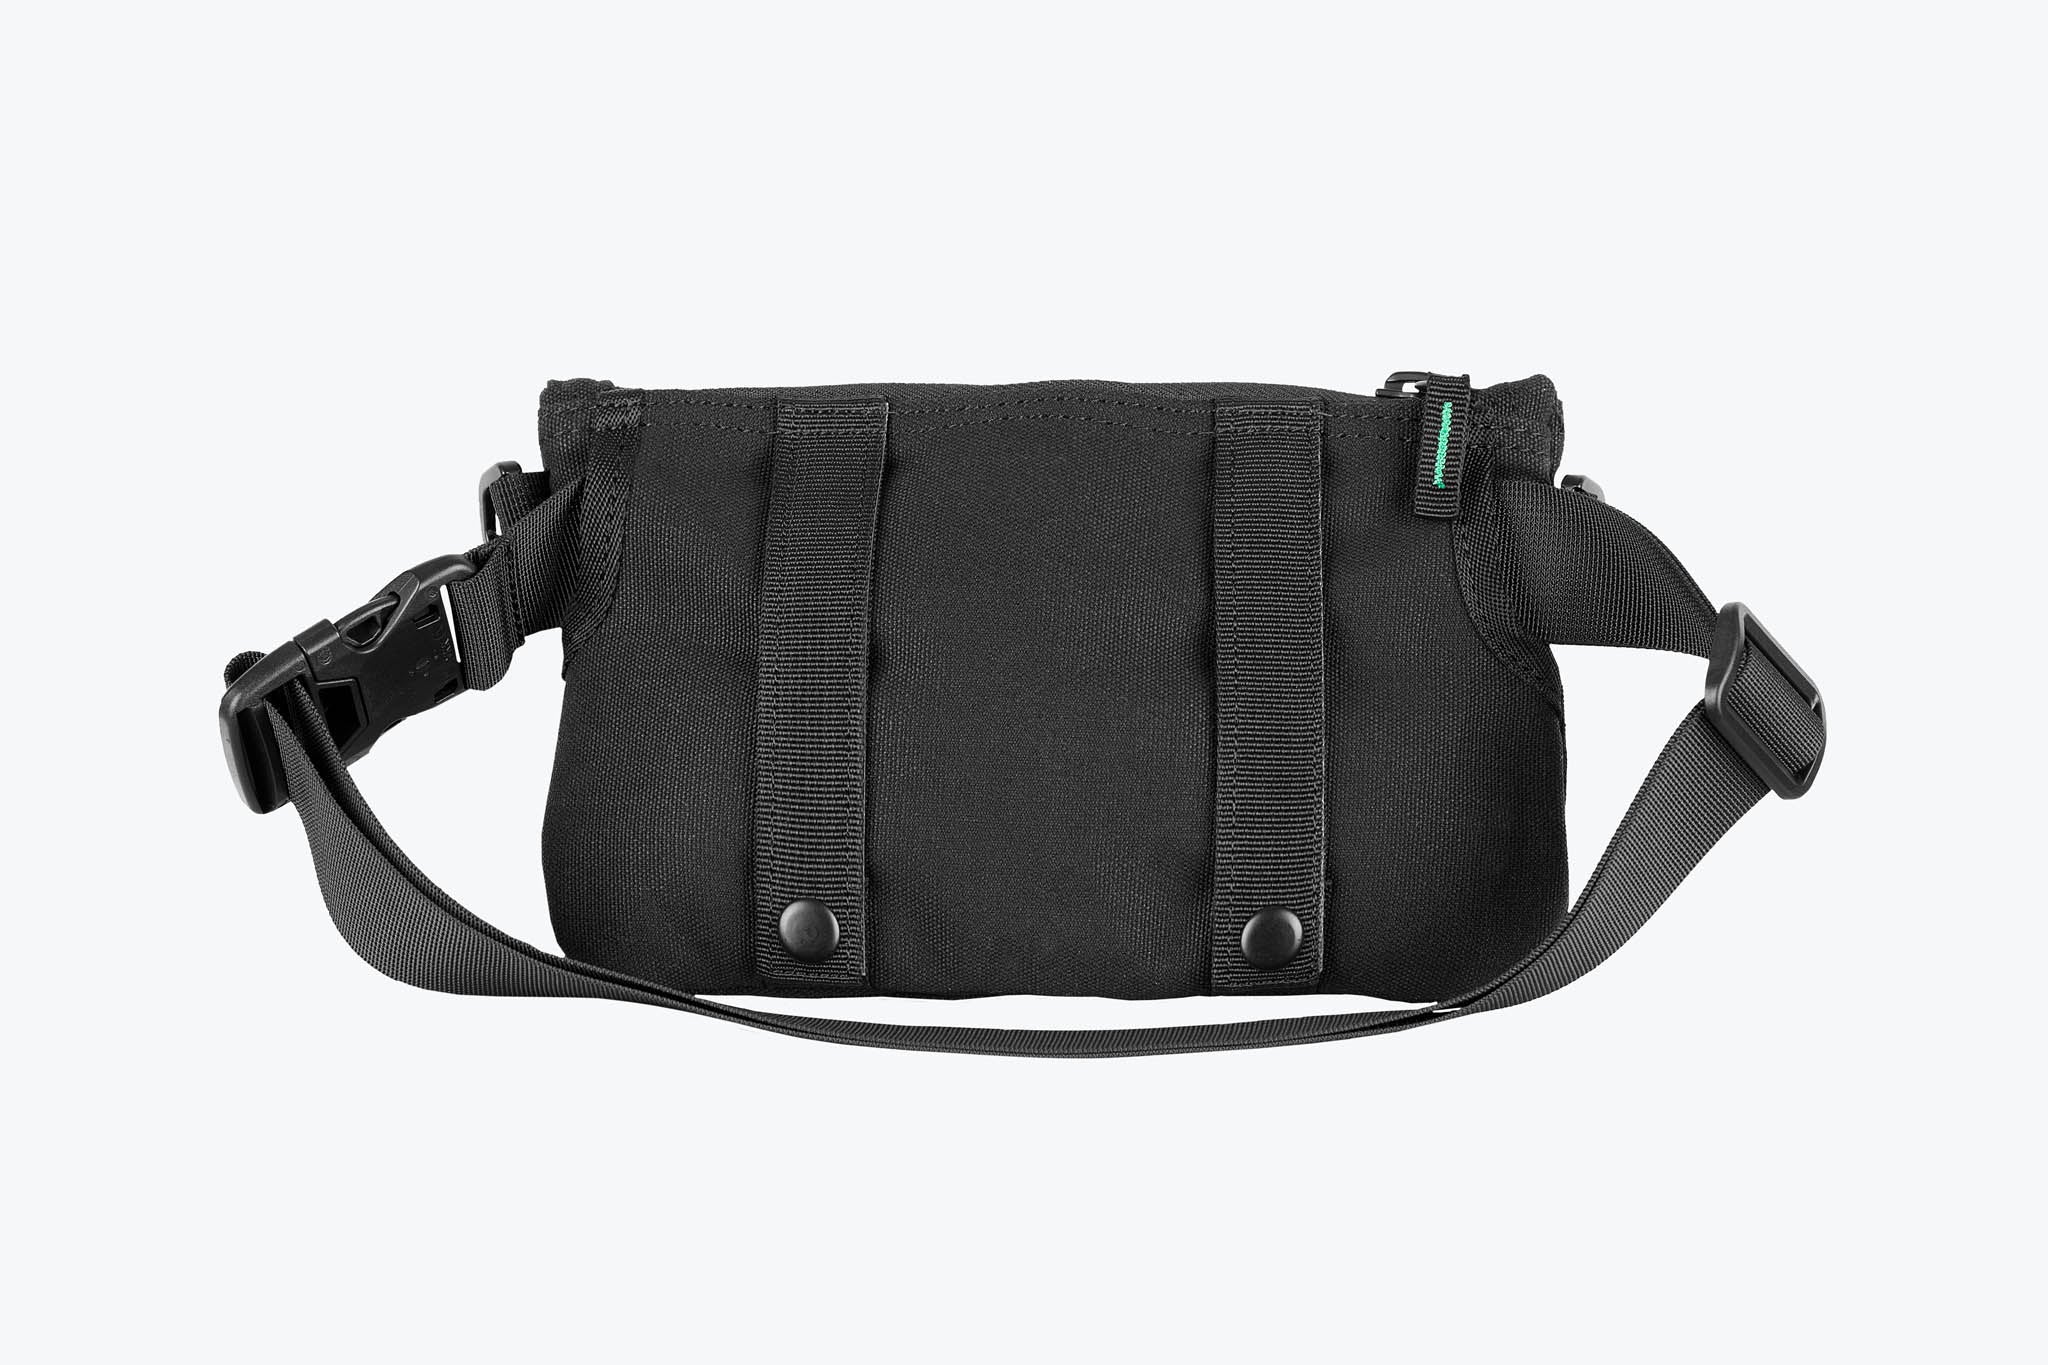 13 Best Fanny Packs For All Price Points